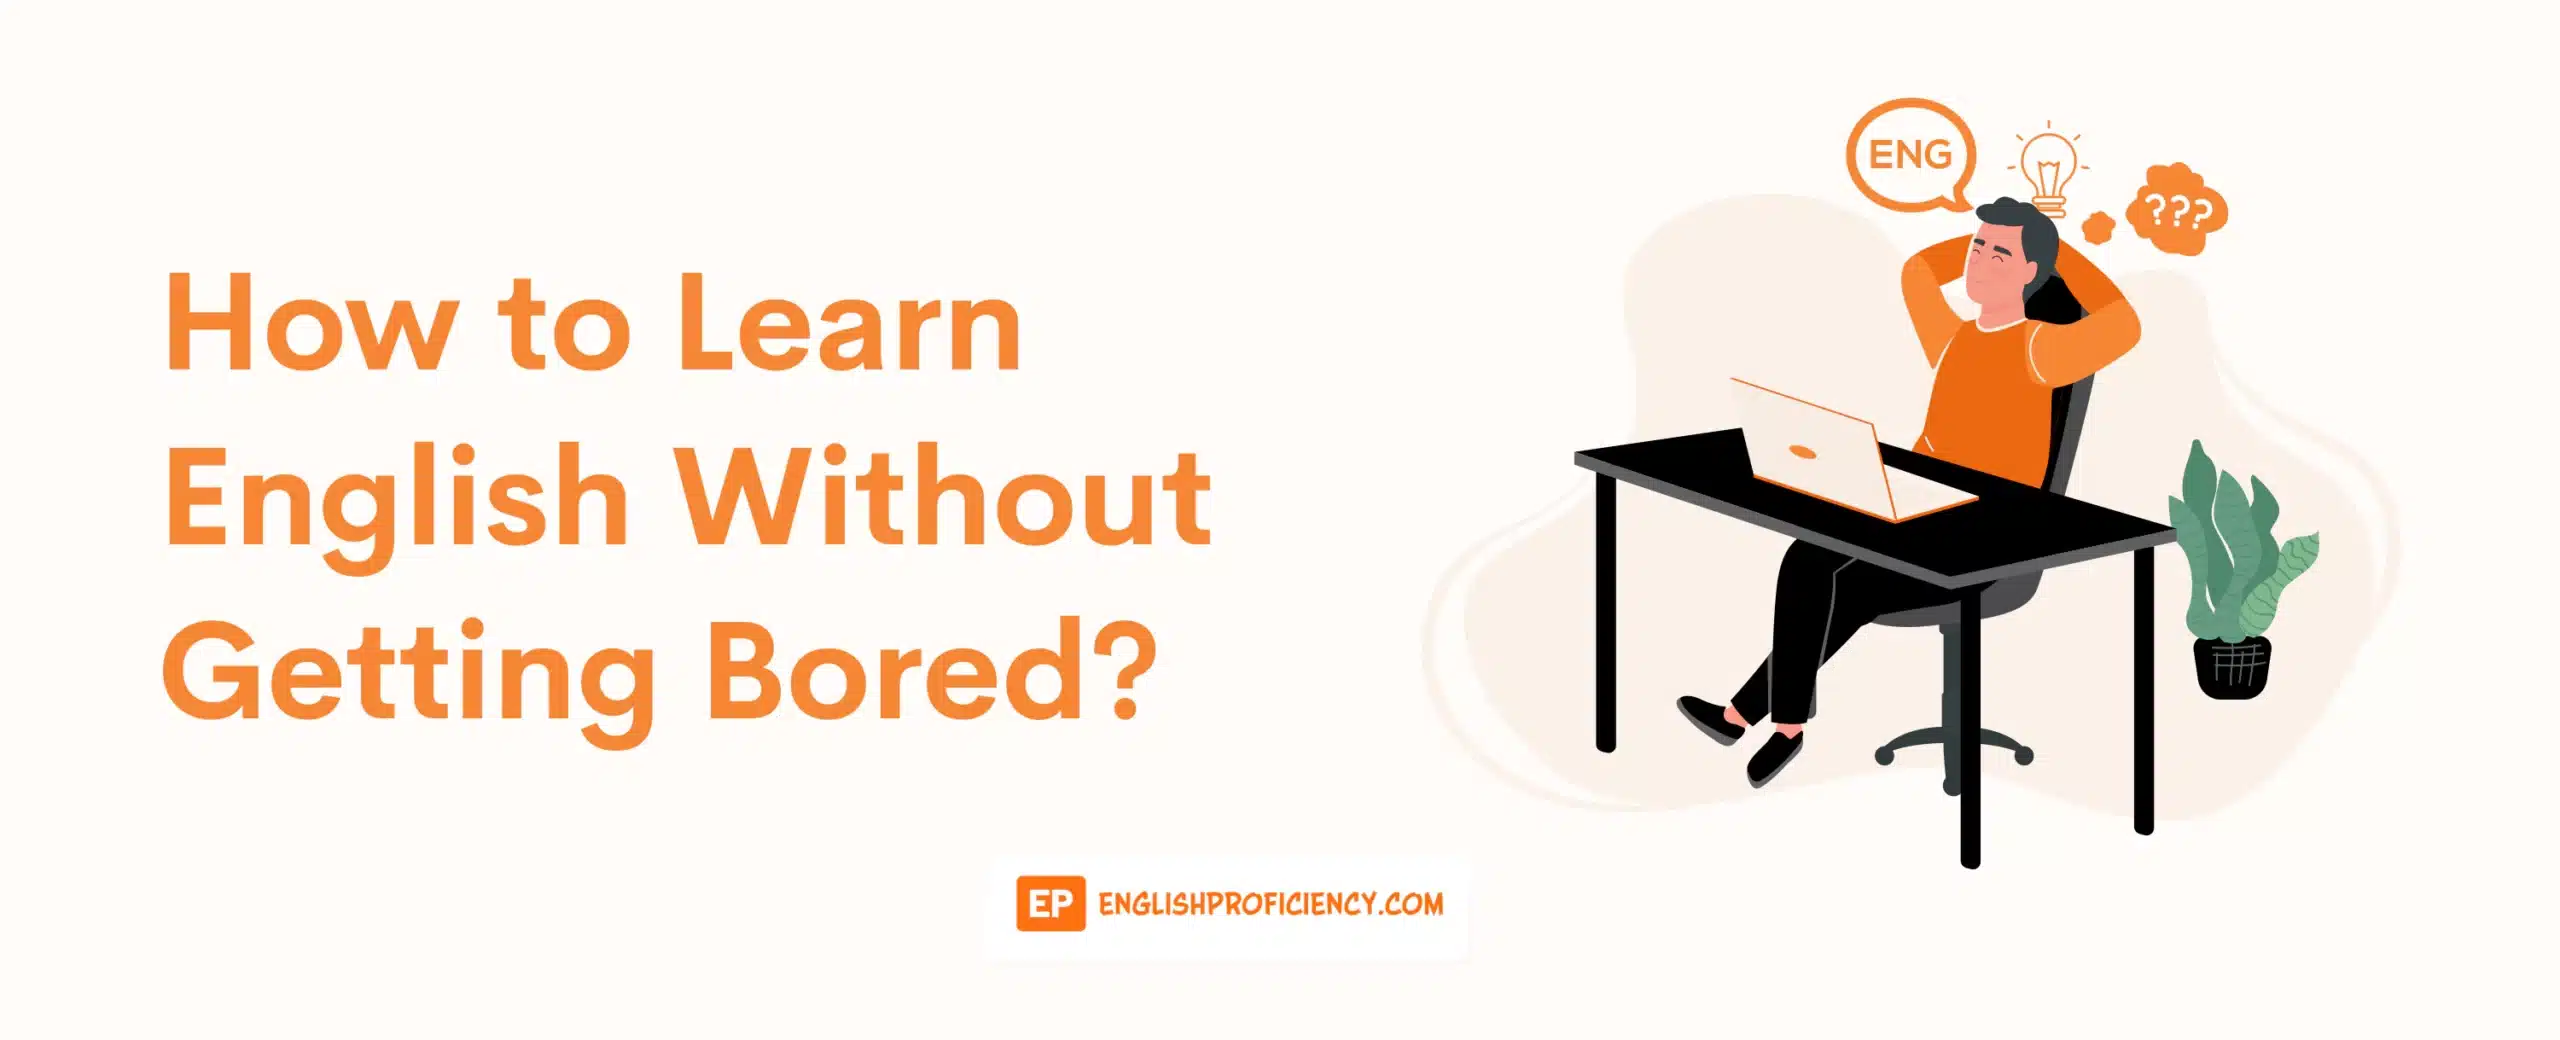 How to Learn English Without Getting Bored